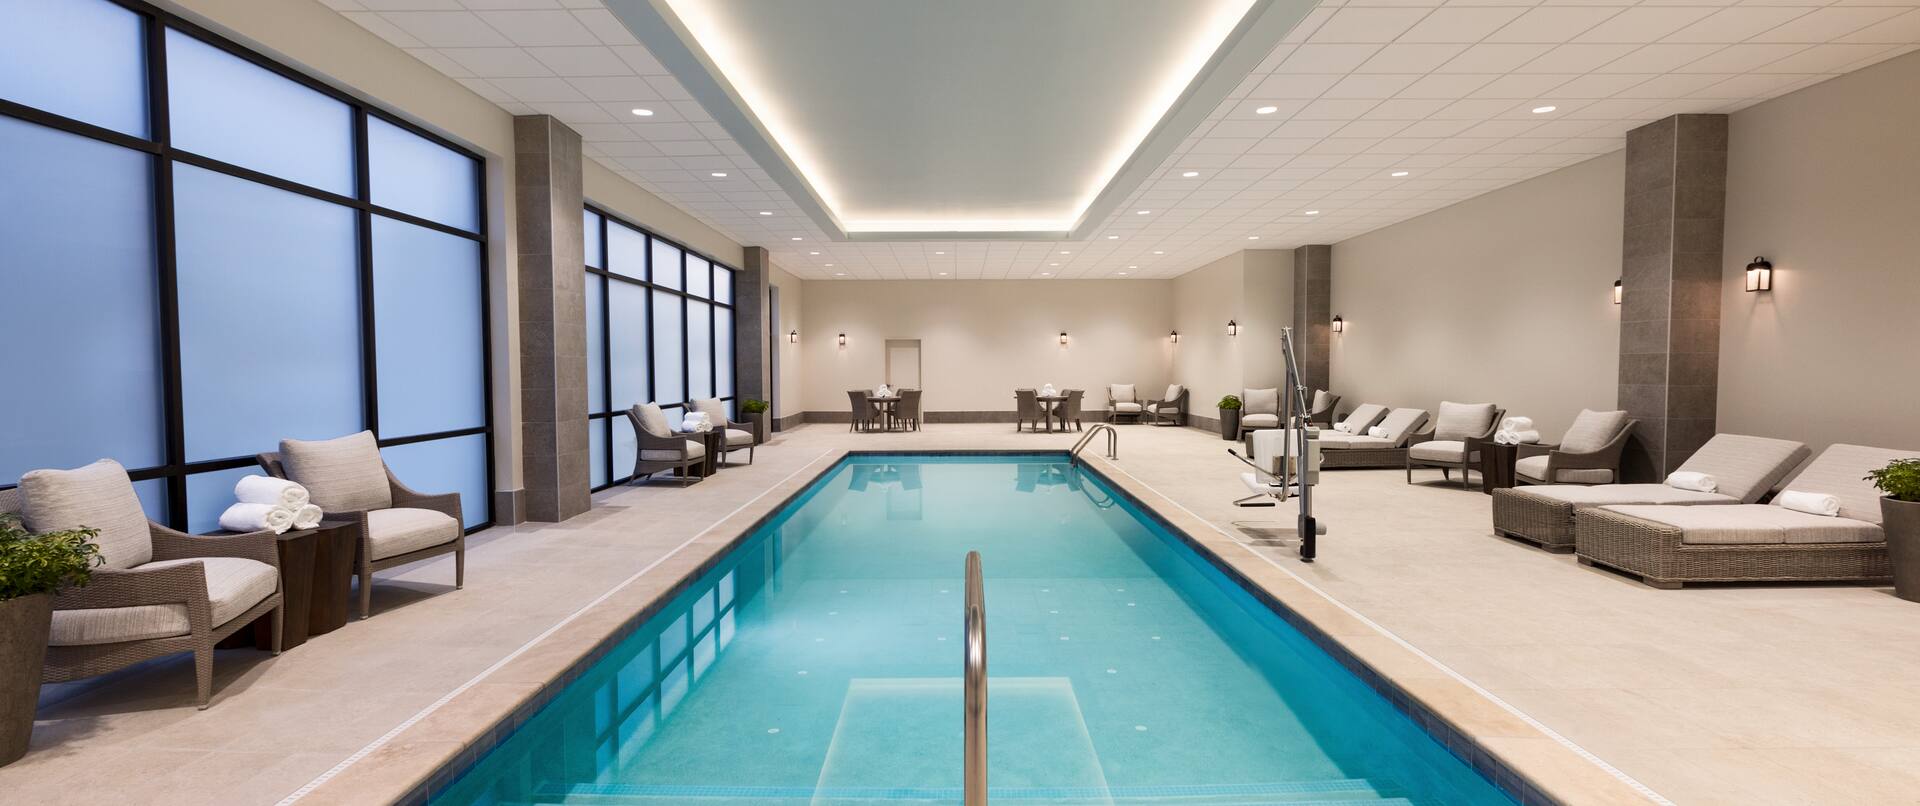 Indoor Swimming Pool with Armchairs and Deck Chairs